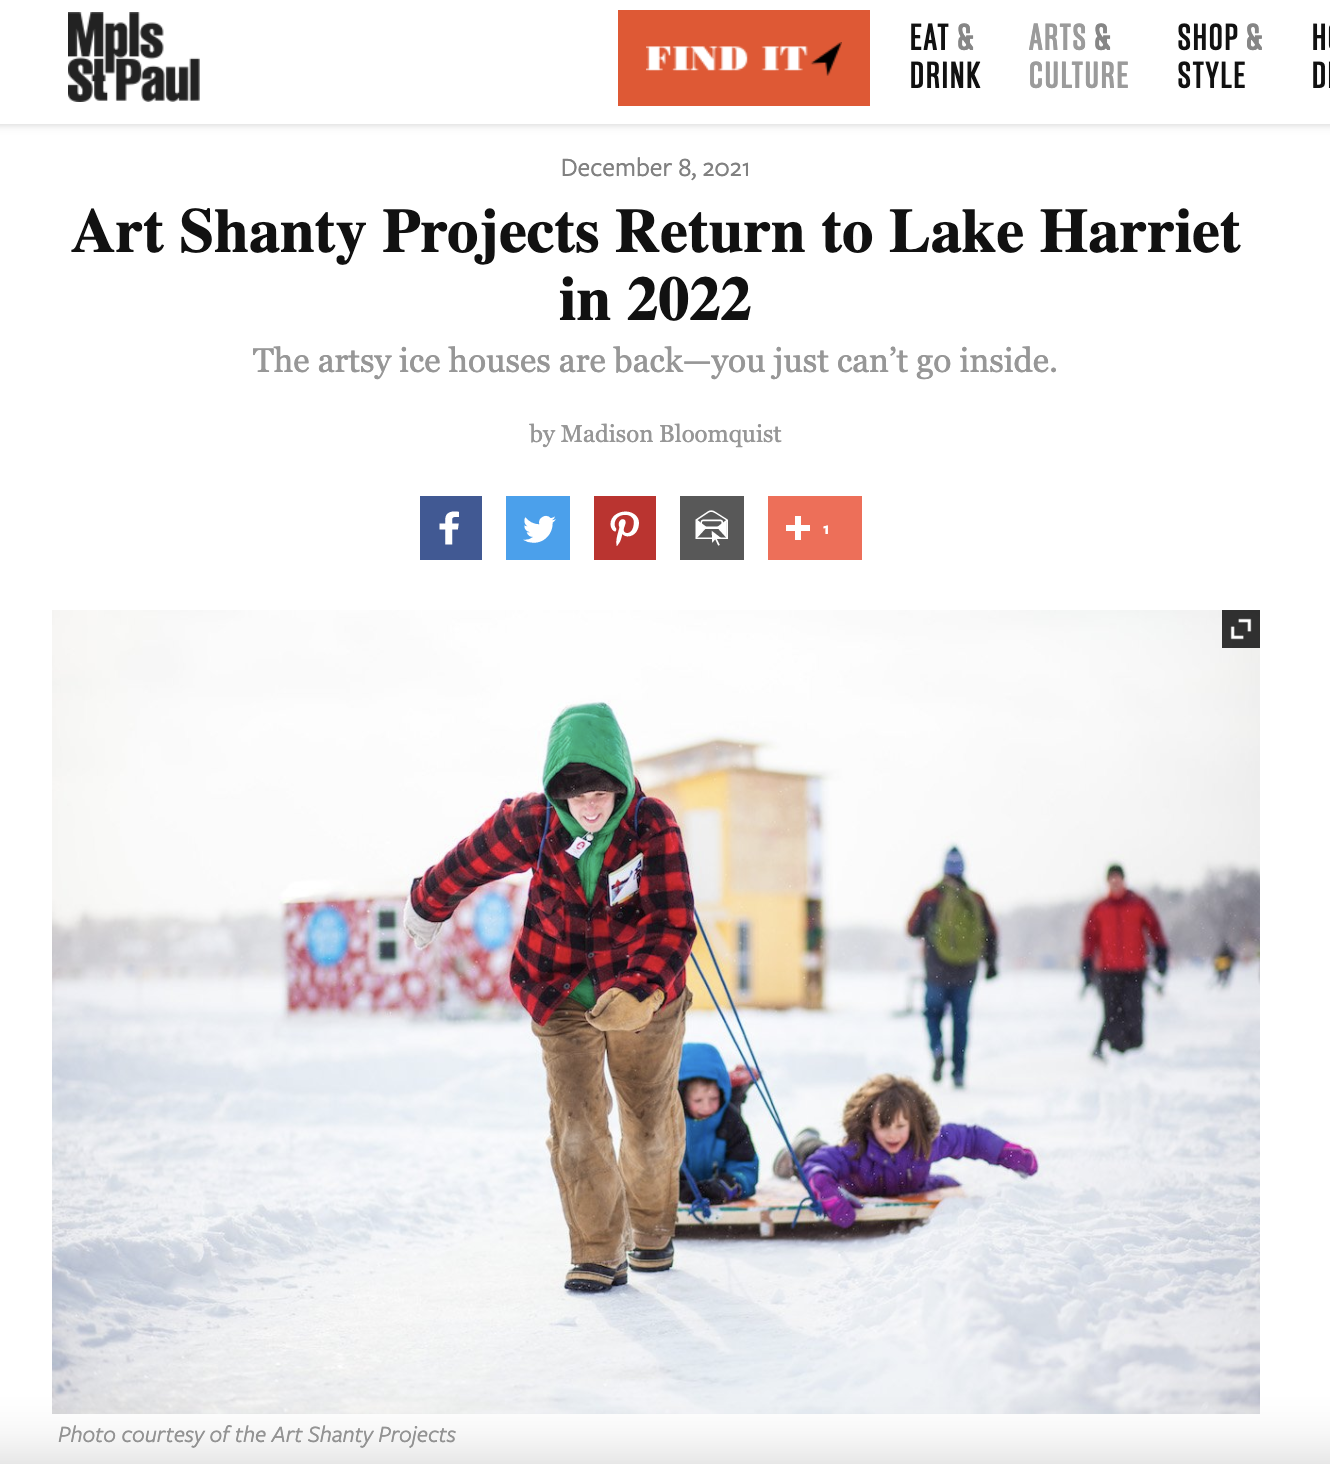 A screenshot from Mpls St Paul online magazine with an image of a person pulling kids on a sled with shanties in the background